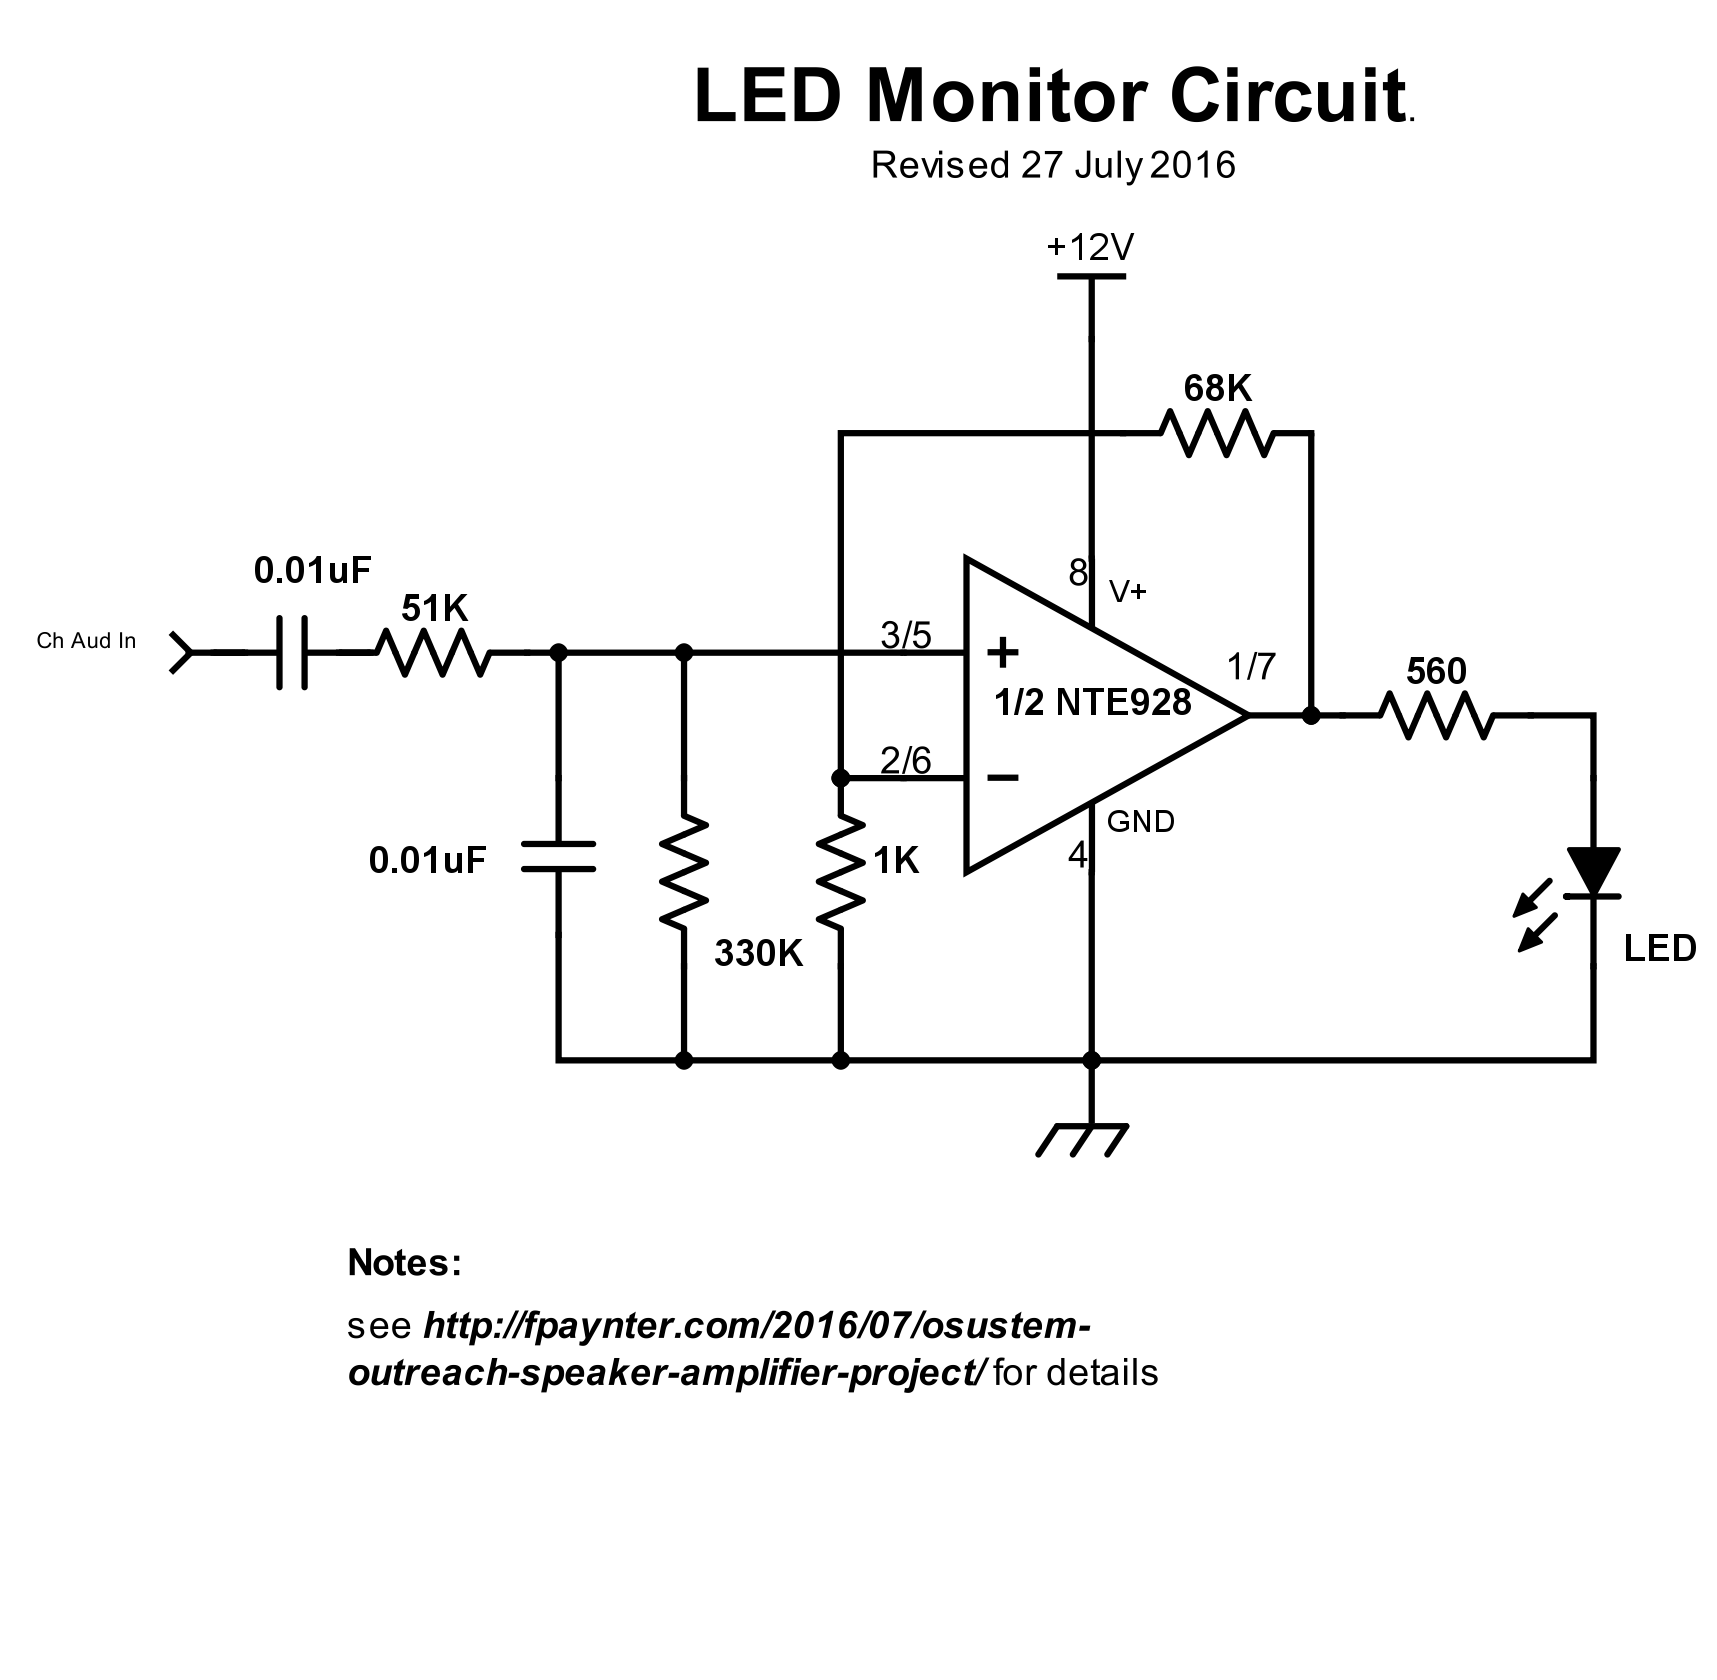 Revised LED monitor schematic - one of two channels shown.